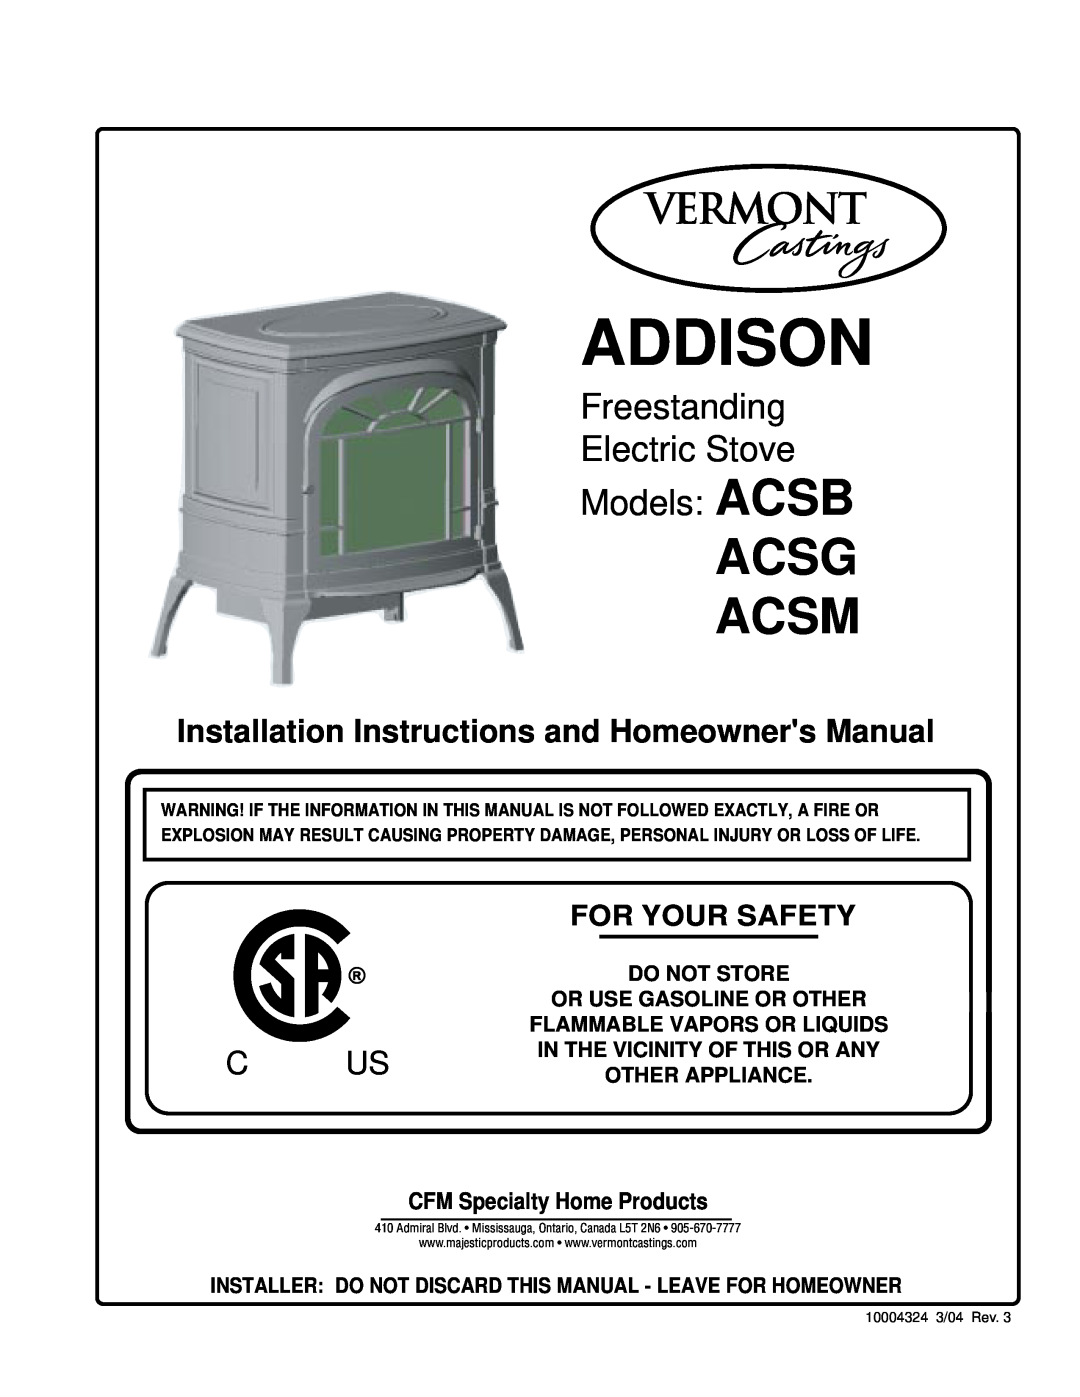 Vermont Casting ACSB installation instructions CFM Specialty Home Products, Addison, Acsg Acsm, C Us, For Your Safety 